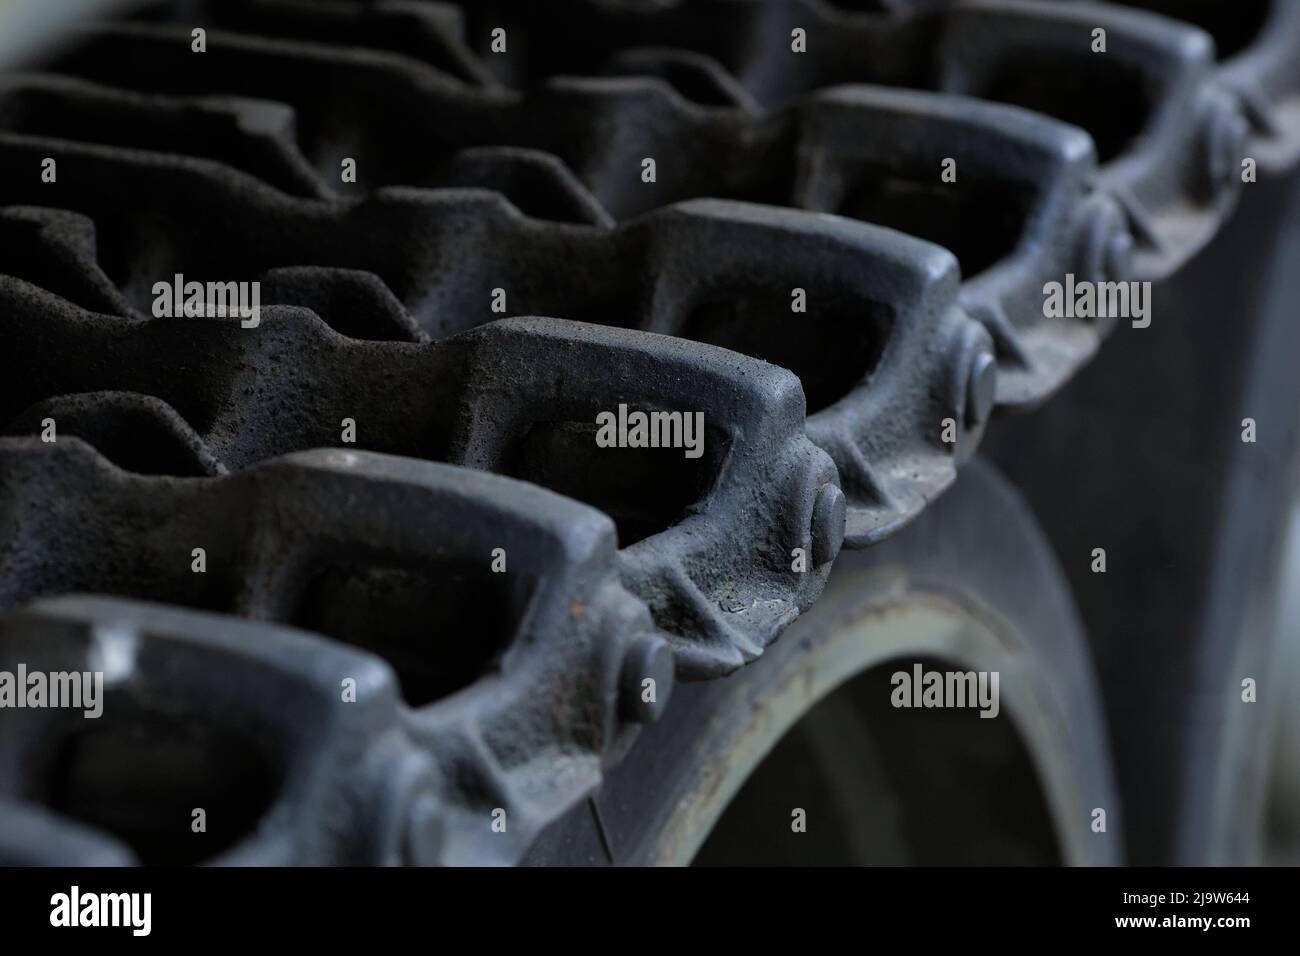 Detail of the track drive of armored vehicle (tread), close up photography Stock Photo